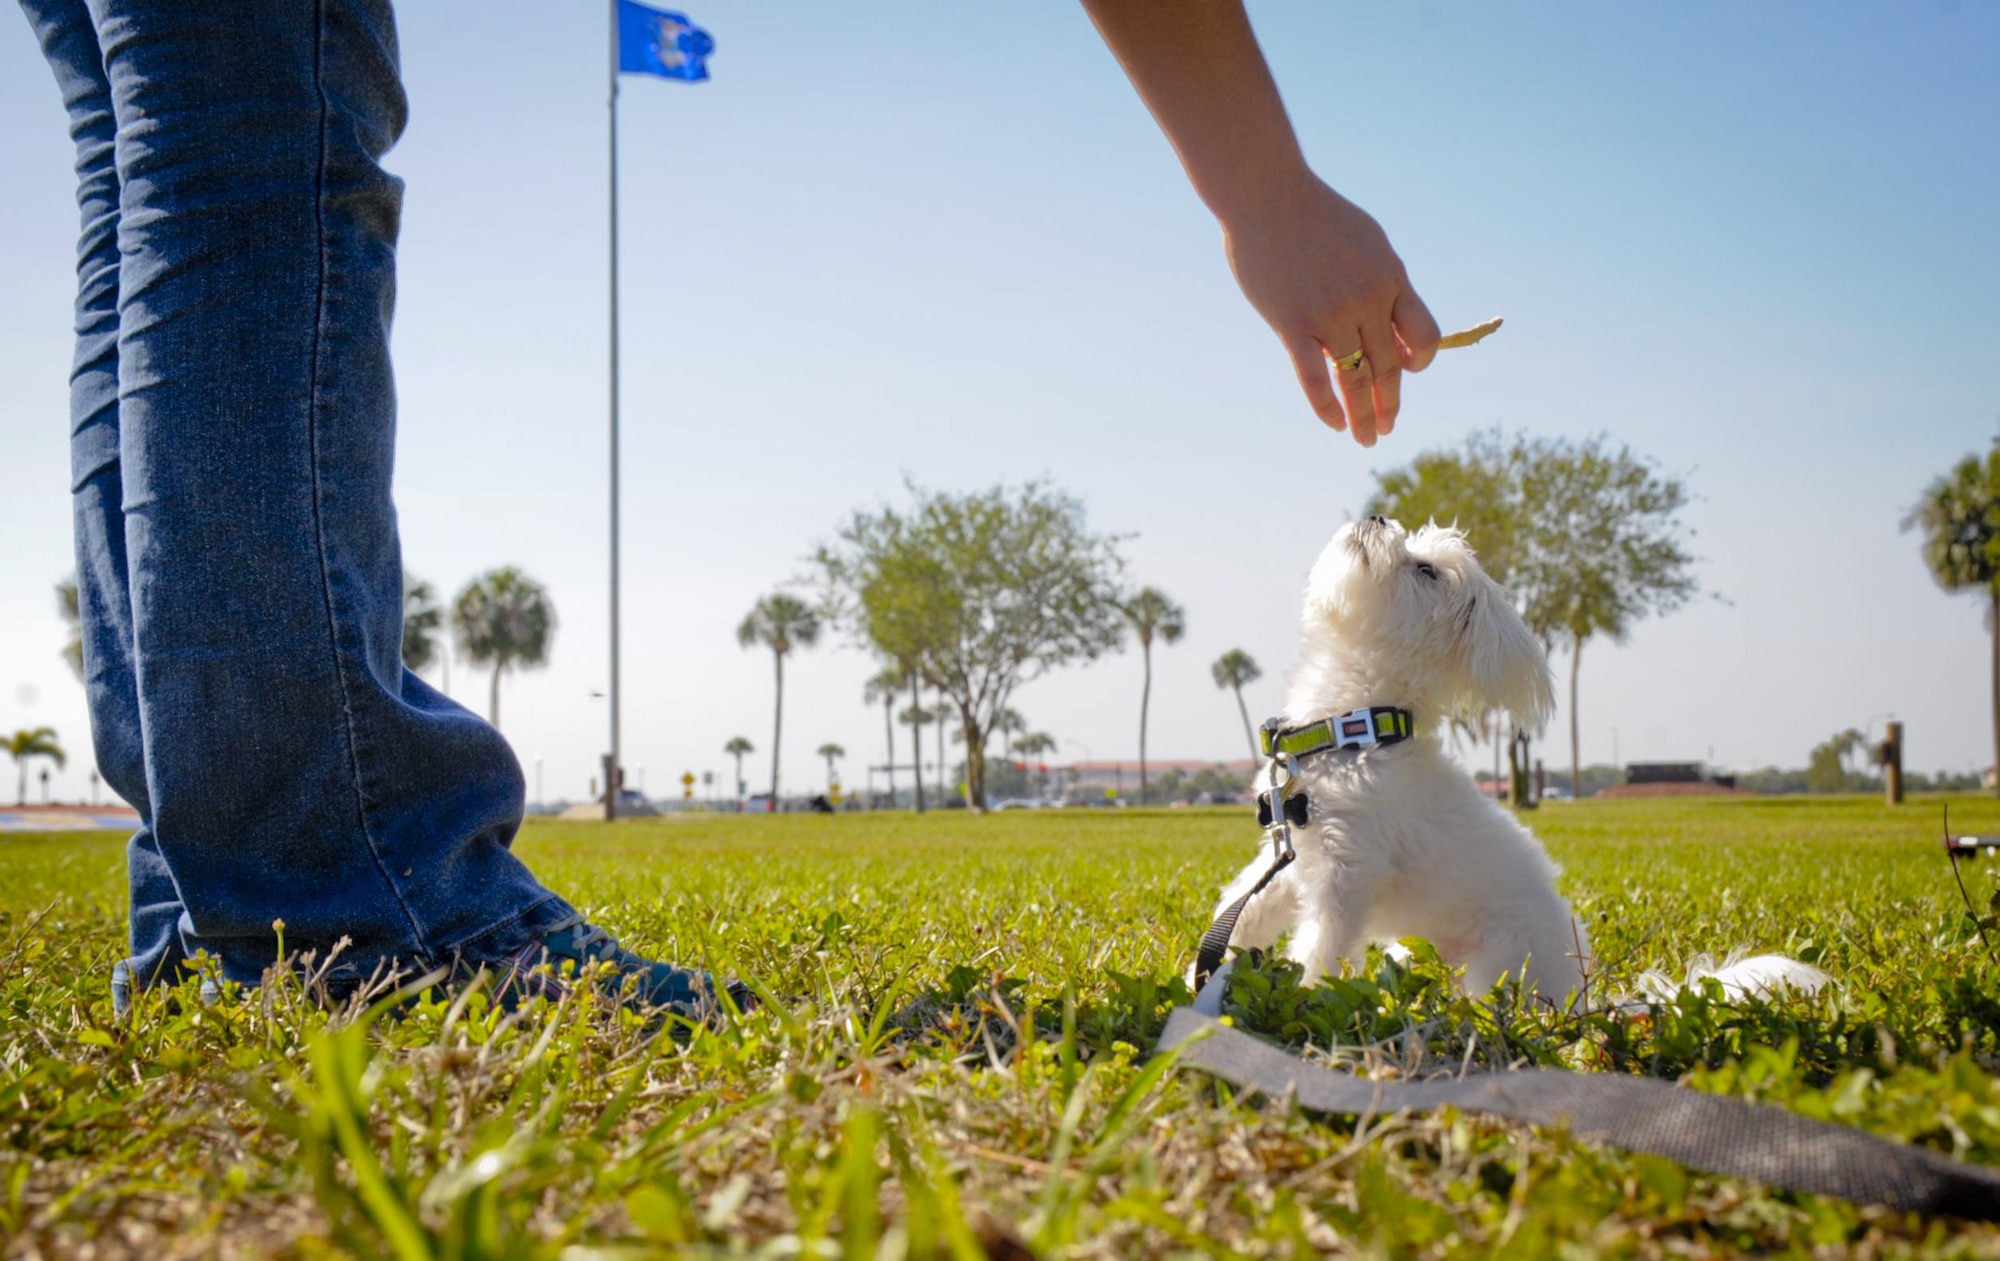 Khaos, the Sexual Assault Prevention and Response therapy dog in-training for the Paw Support Program, completes certification with his trainer at MacDill Air Force Base, Fla., May 9, 2017. Khaos has completed three weeks of full immersion training and has a few additional requirements to complete before he will be qualified to assist sexual assault victims. (U.S. Air Force photo by Senior Airman Mariette Adams)